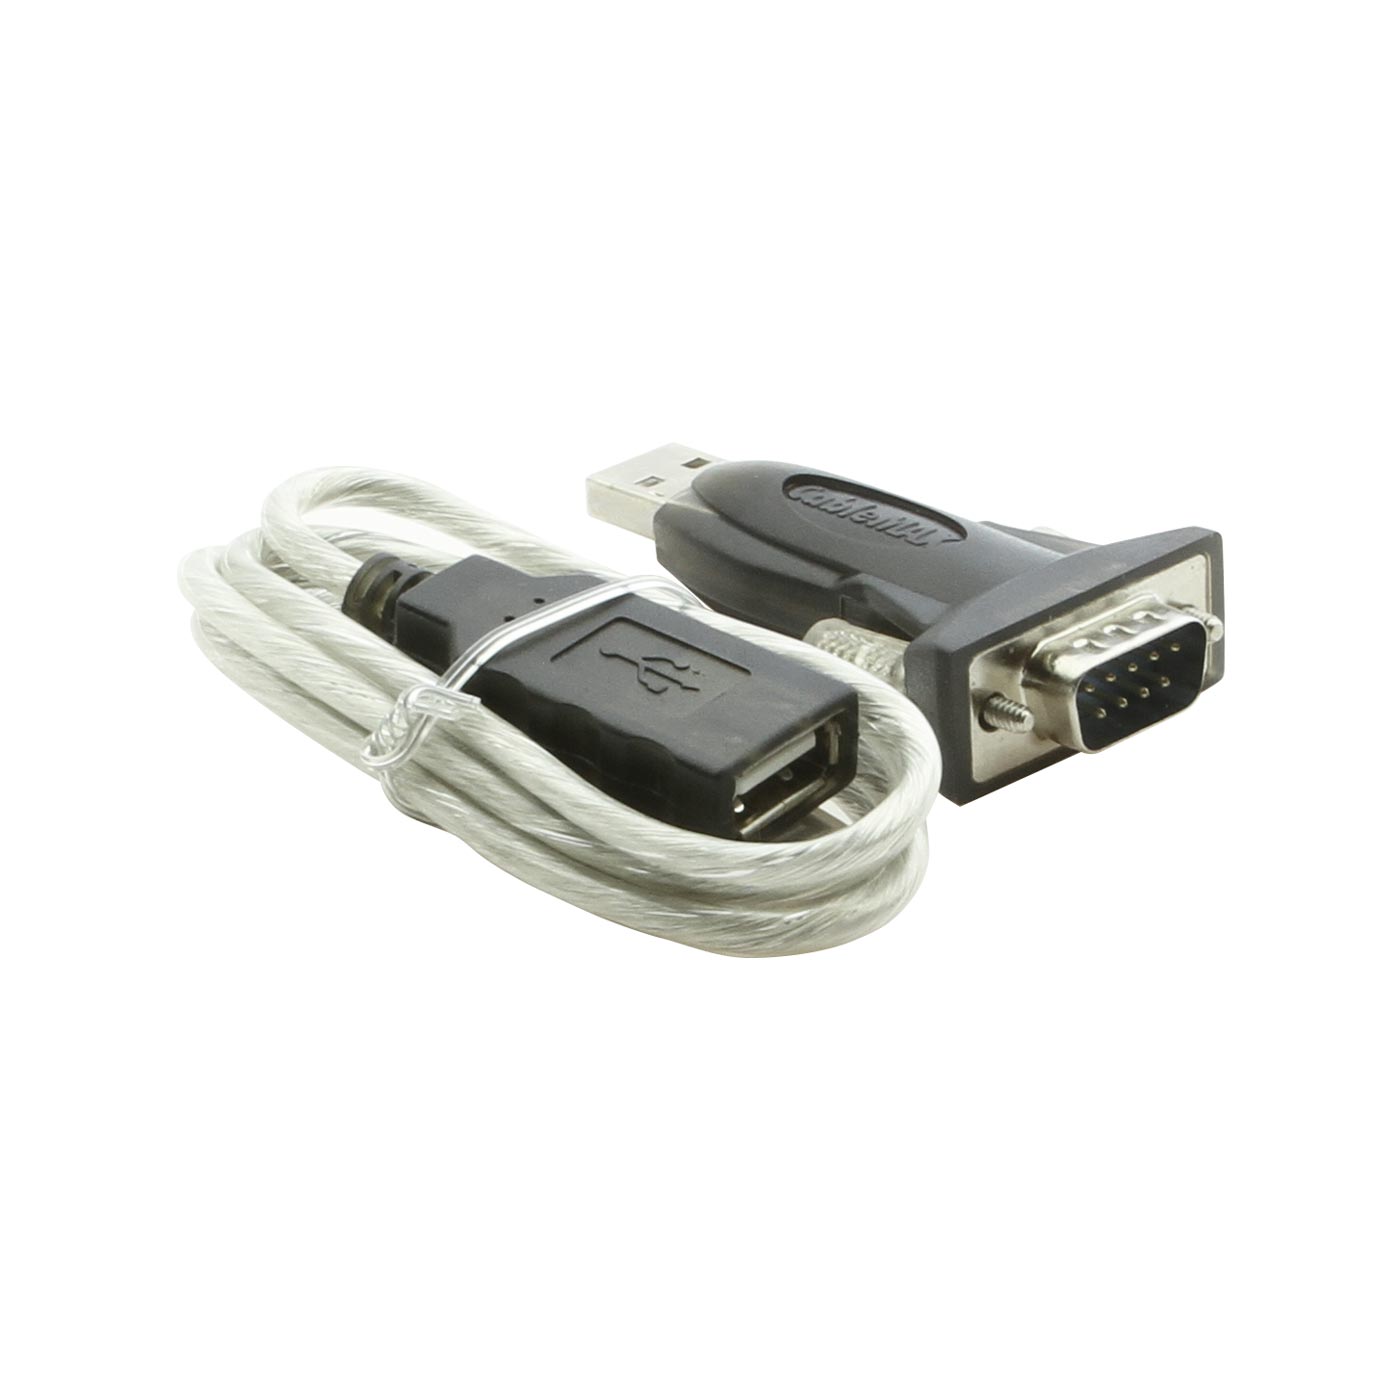 muestra gorra compensación USB to Serial Adapter - Works seamlessly with TunerStudio